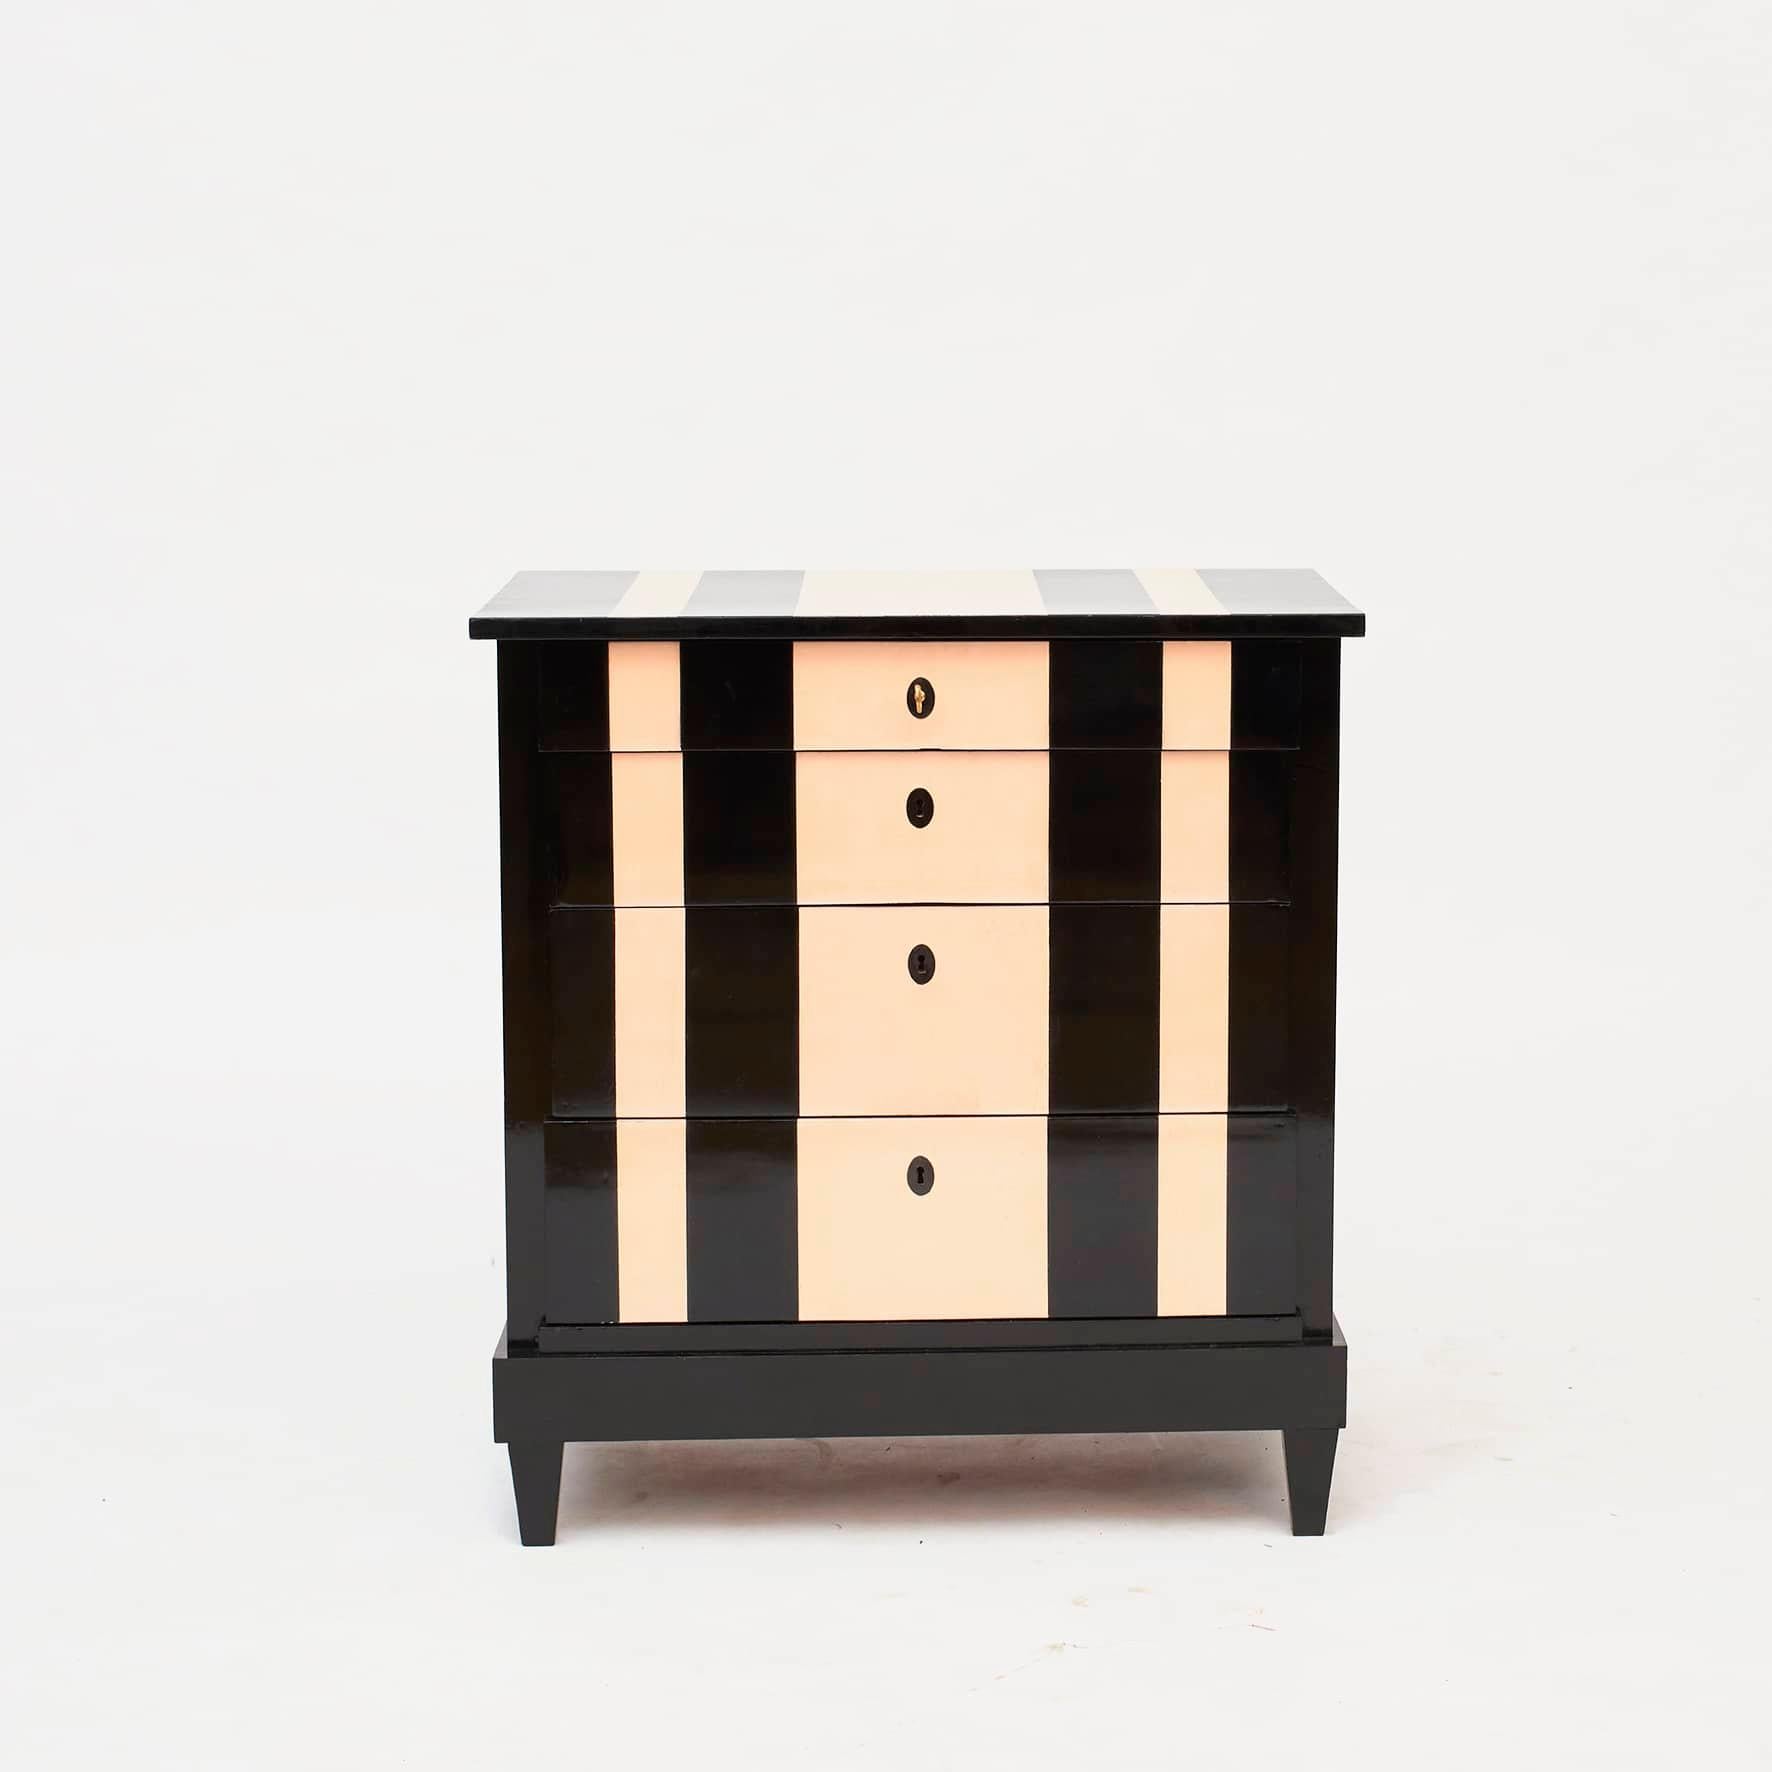 'Chanel' inspired chest of drawers. Danish chest of drawers, late empire, circa 1840.
Mahogany with later finish of ebonized (black) and rosa polish in stripes with French polish, which gives the chest of drawers a beautiful and elegant look.